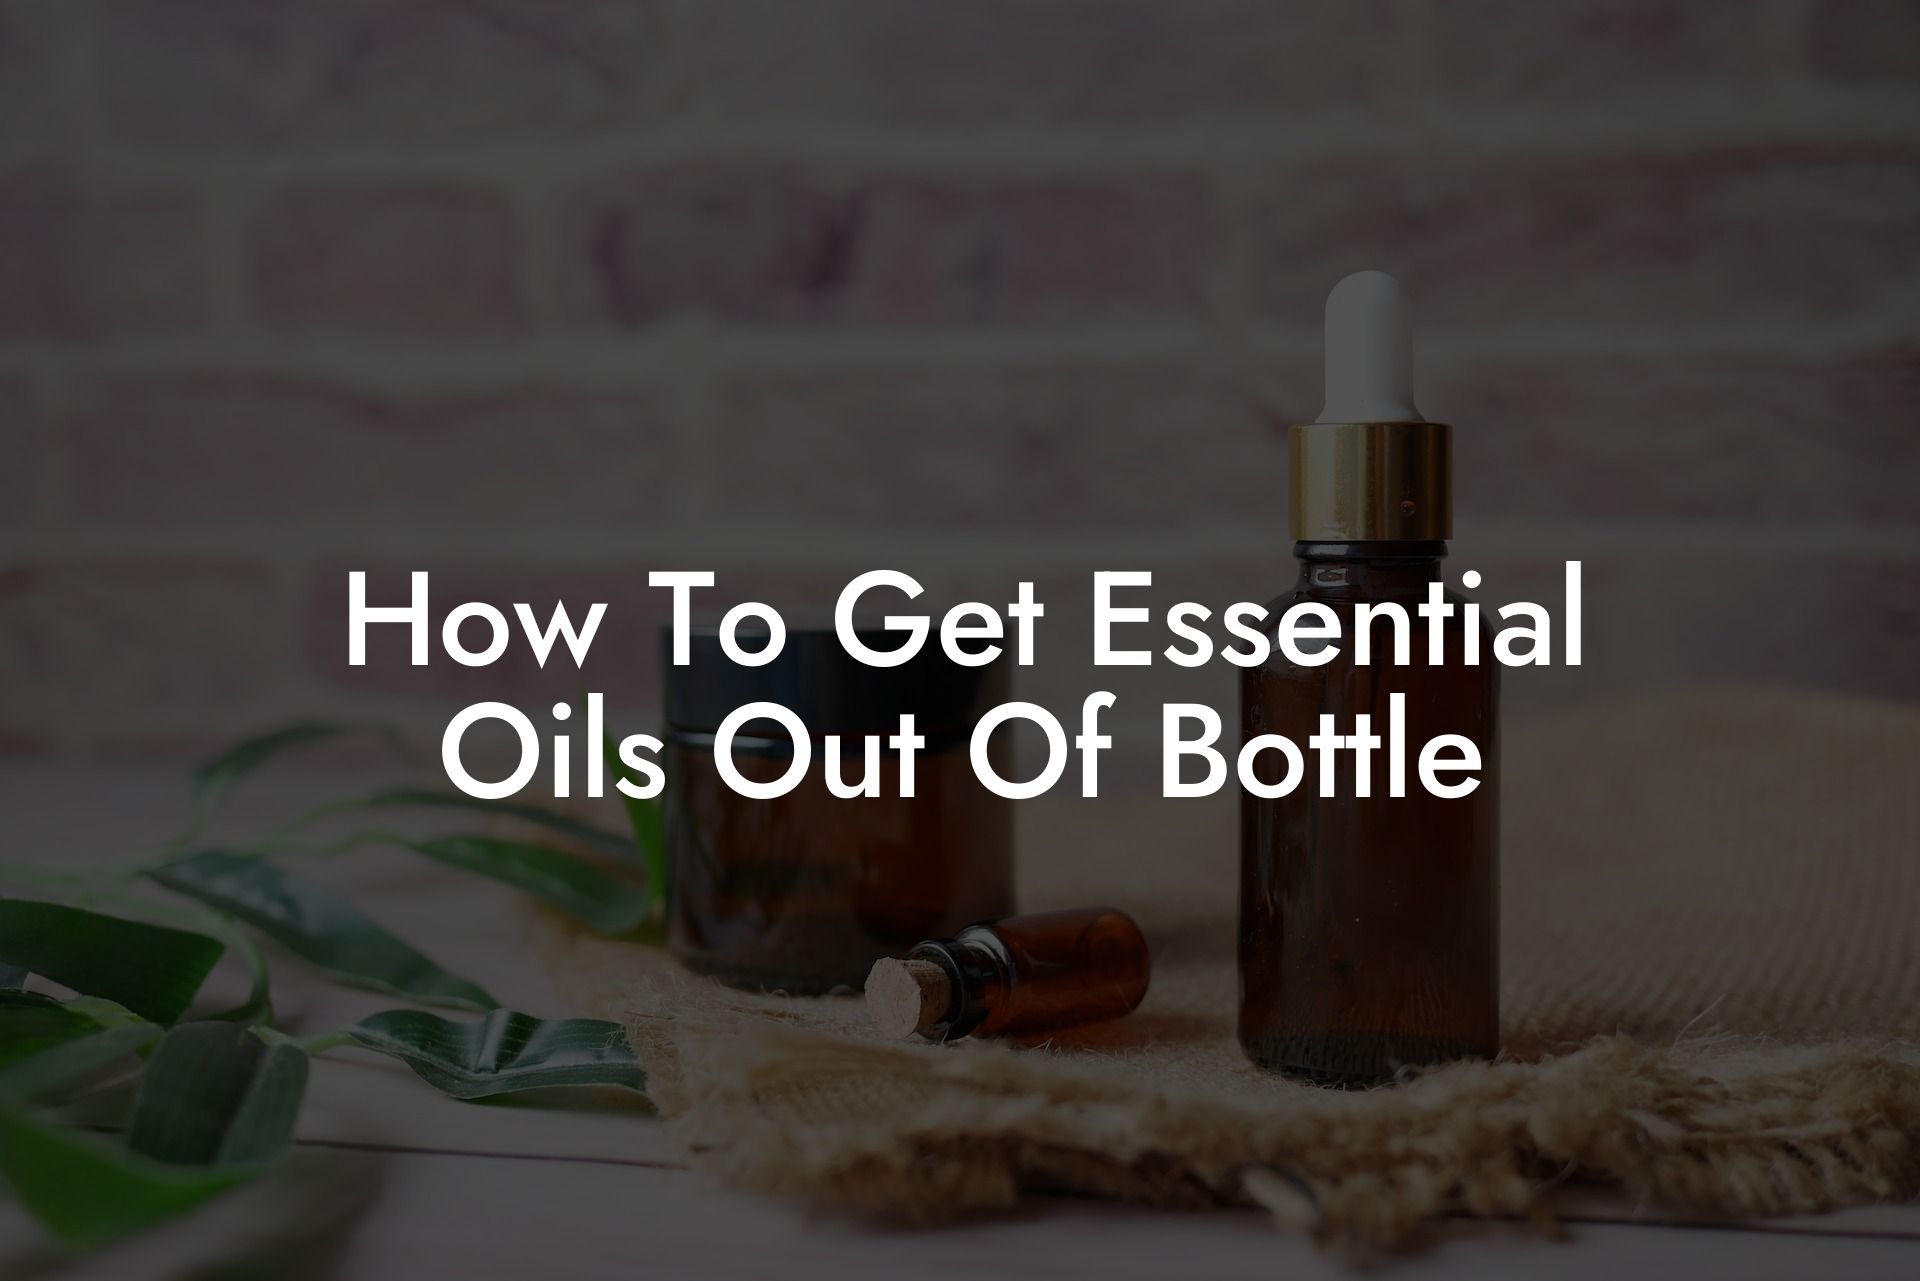 How To Get Essential Oils Out Of Bottle